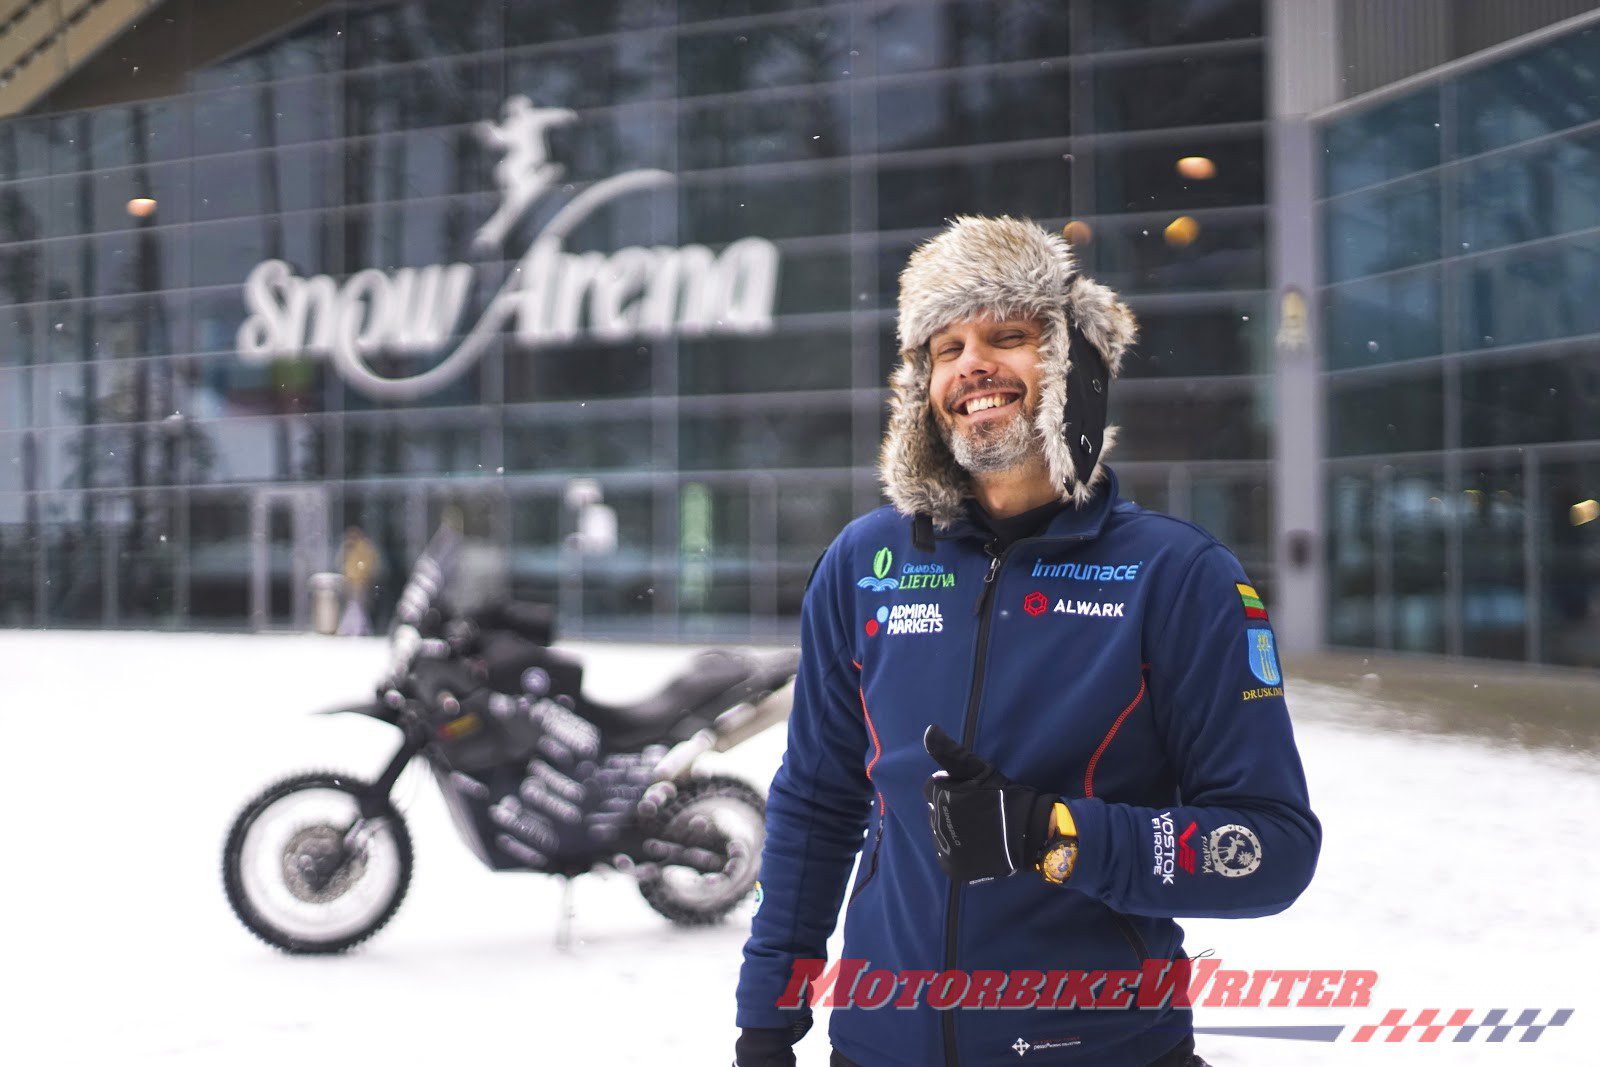 Karolis Mieliauskas will be riding 1000km across Siberia in temperatures down to -60C to research active meditation.